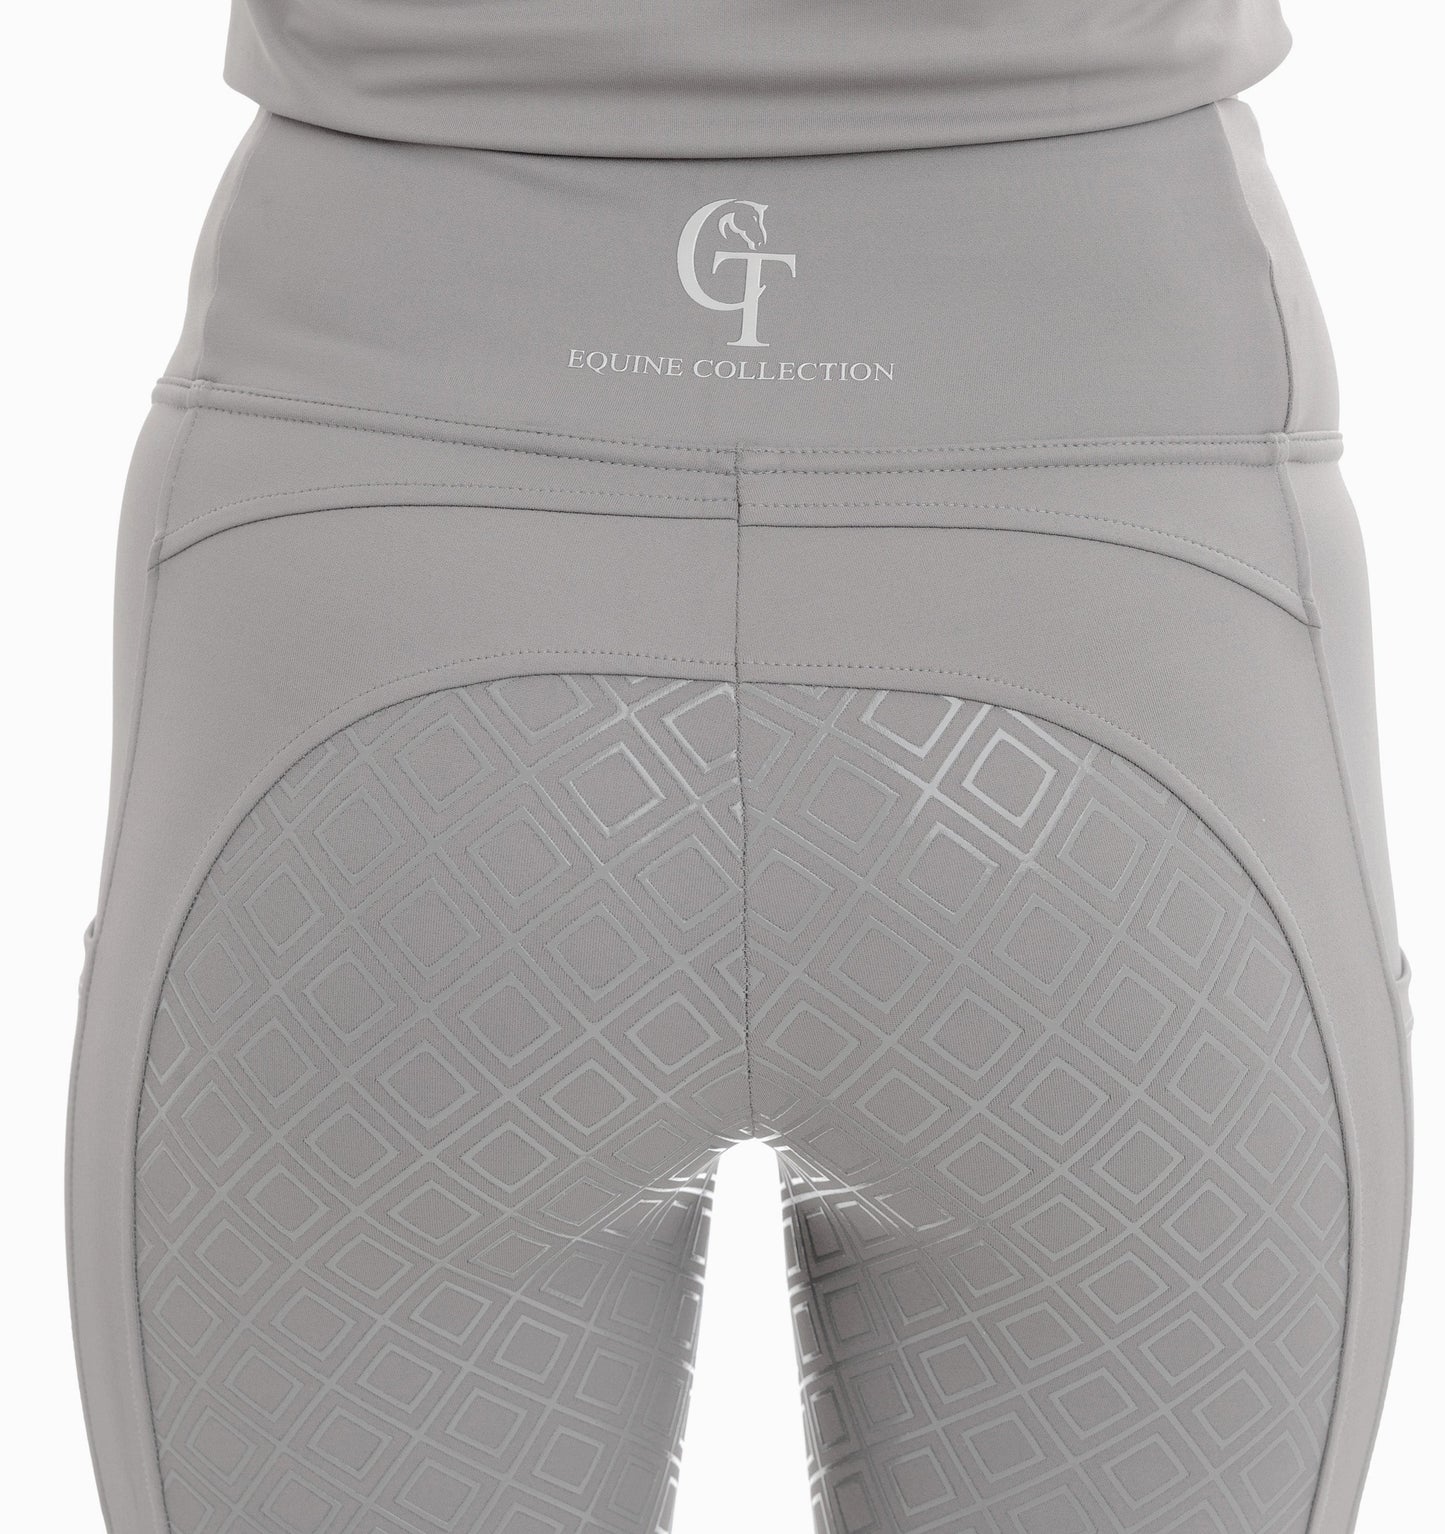 Unlined Riding Tights - OFF WHITE WITH GREY SEAT – Empire Equestrian